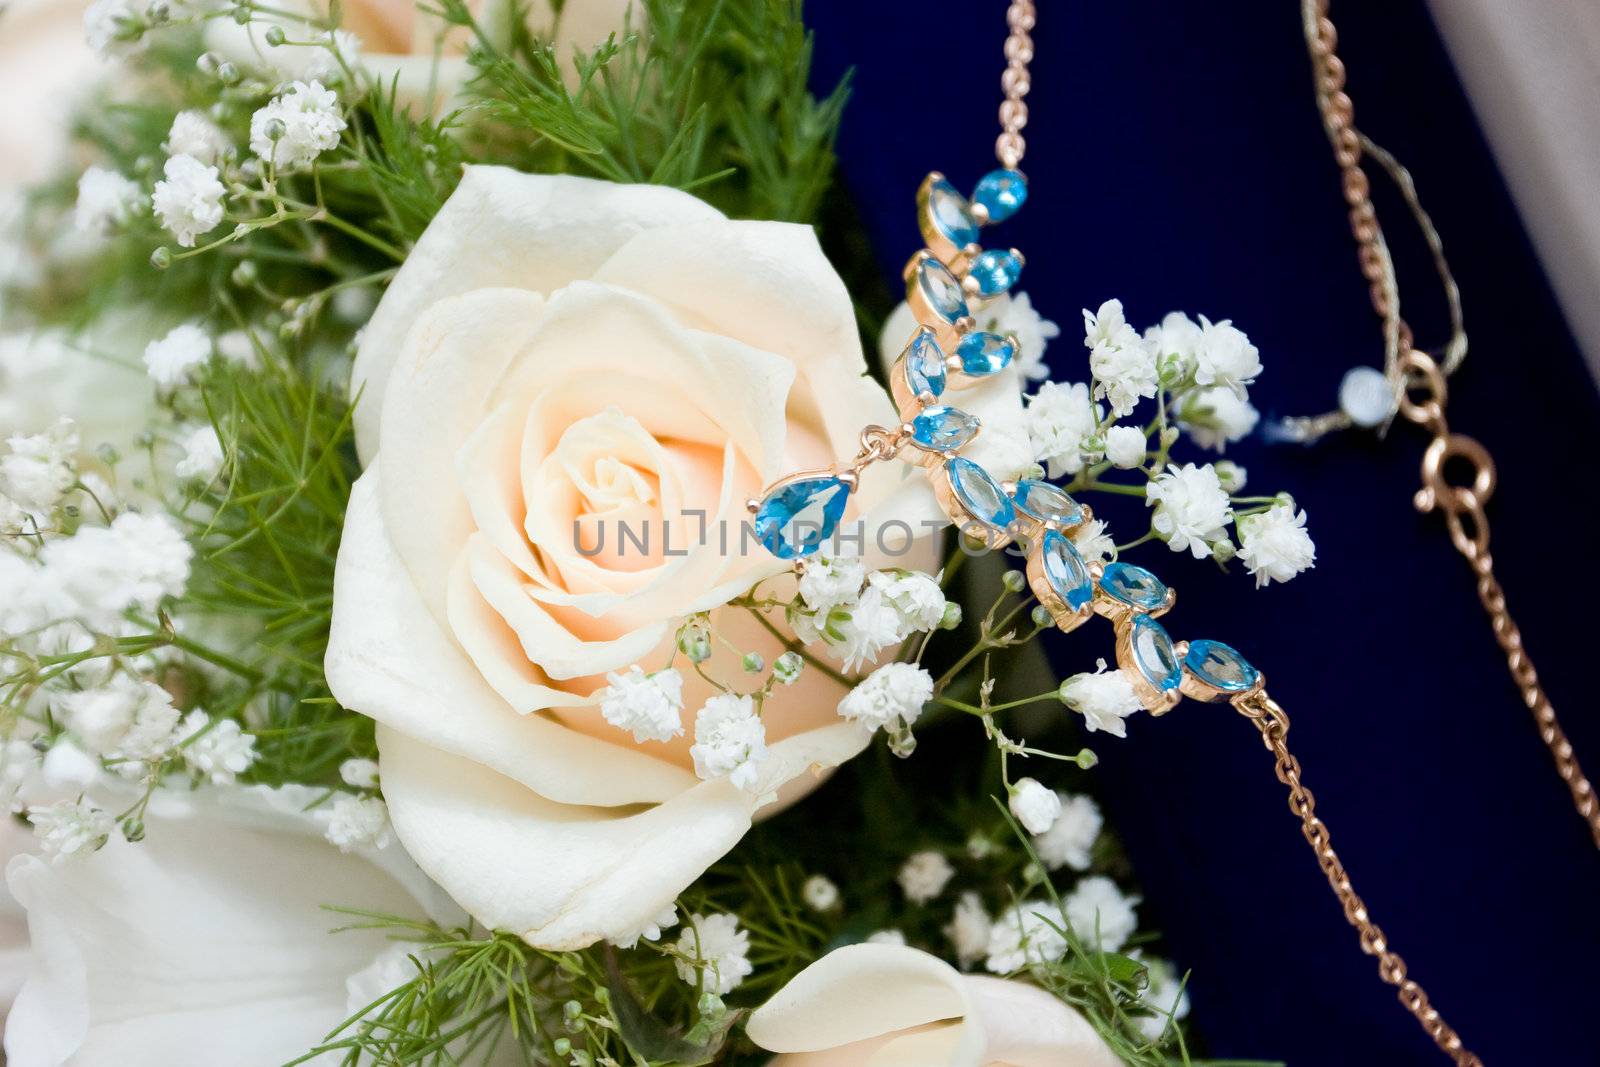 necklace over a white rose wedding bouquet